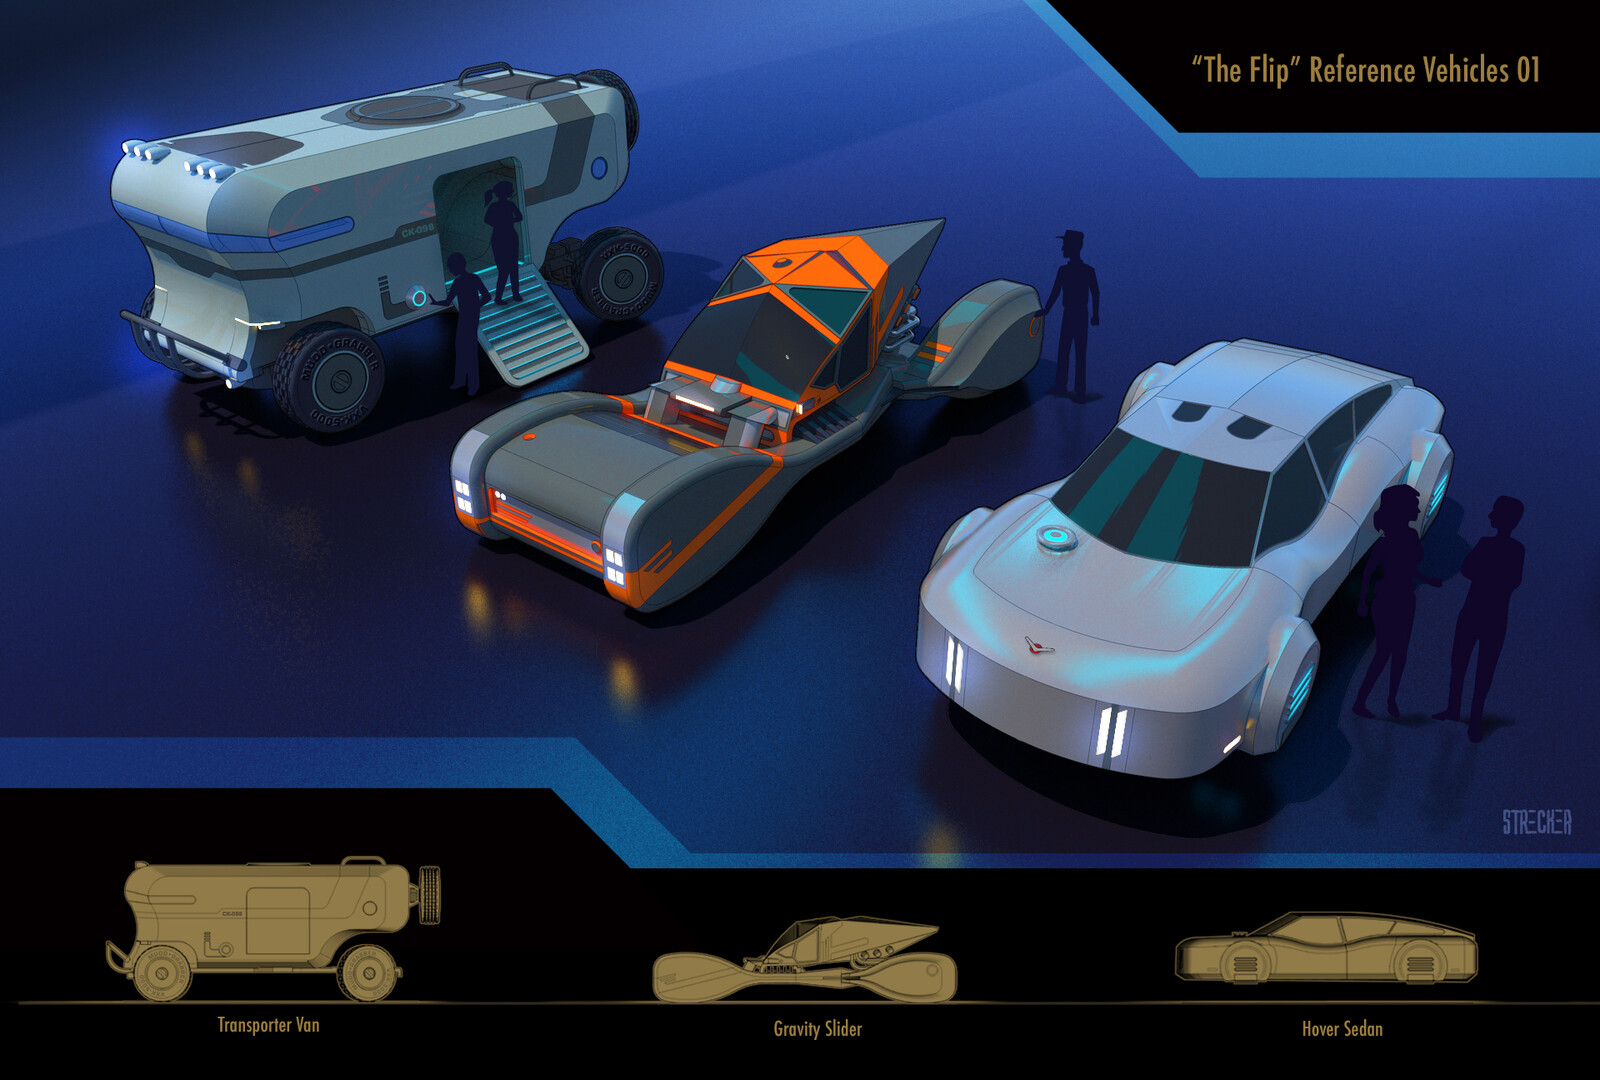 Some of the higher-end background vehicles in the Flip.